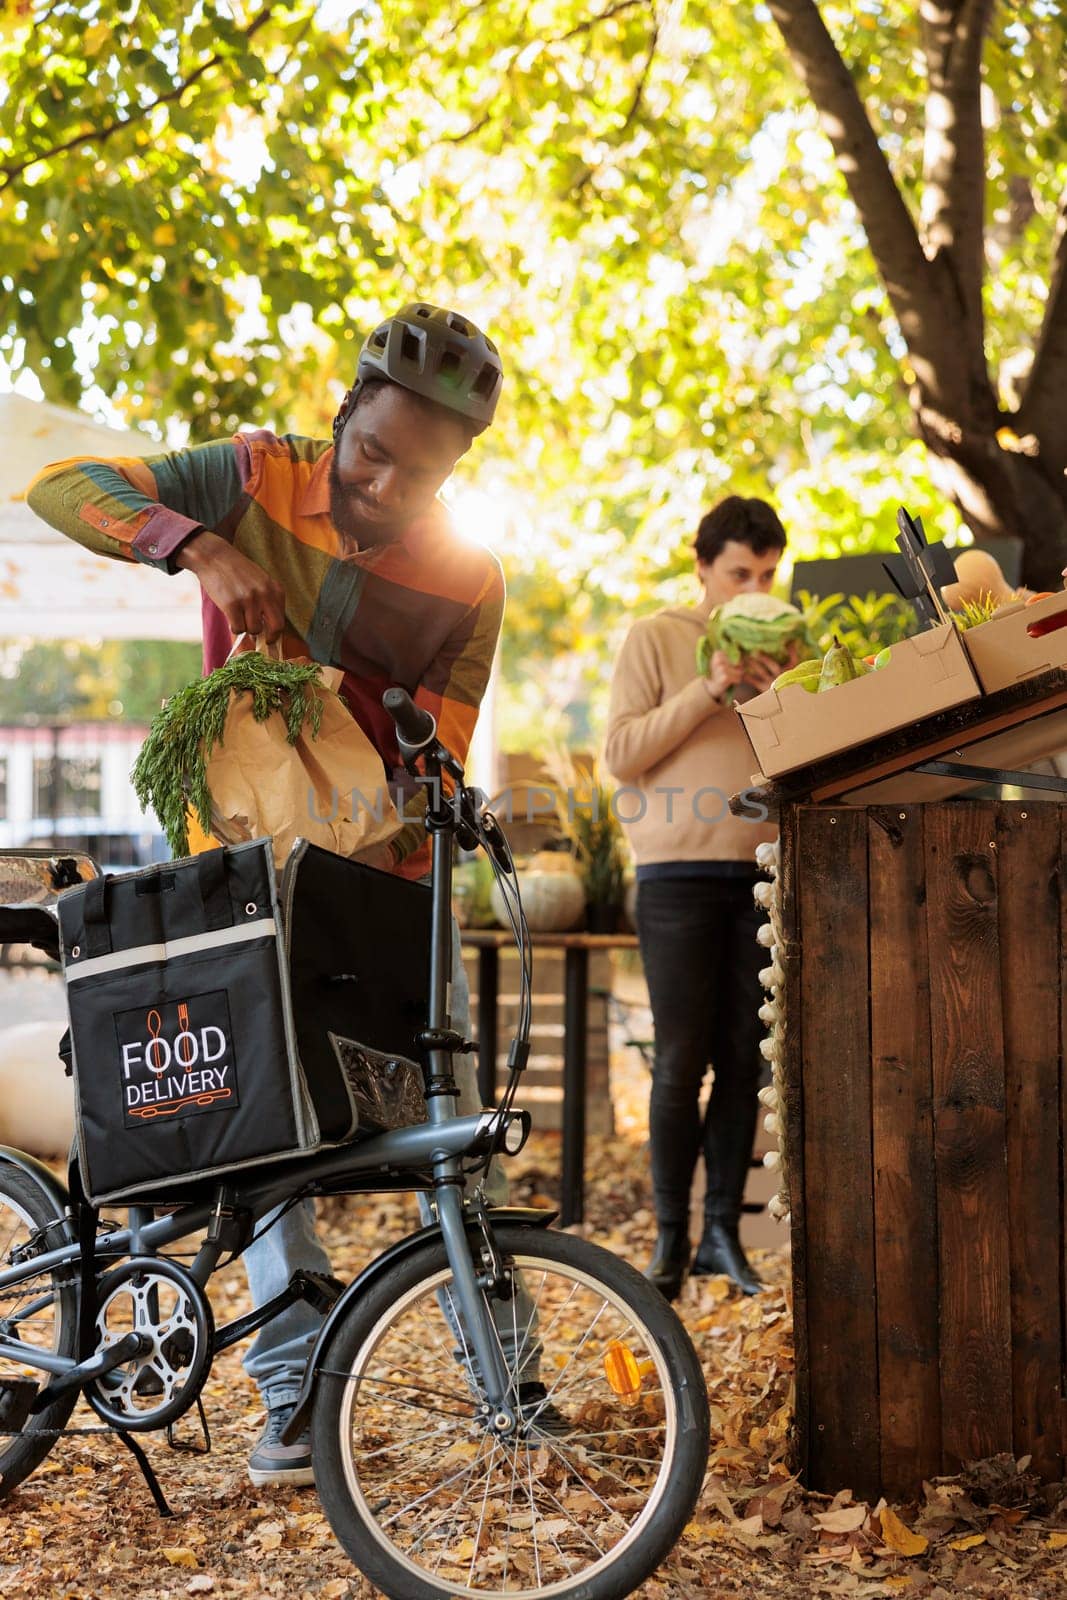 Deliveryman with thermal backpack picking up fresh produce order by DCStudio